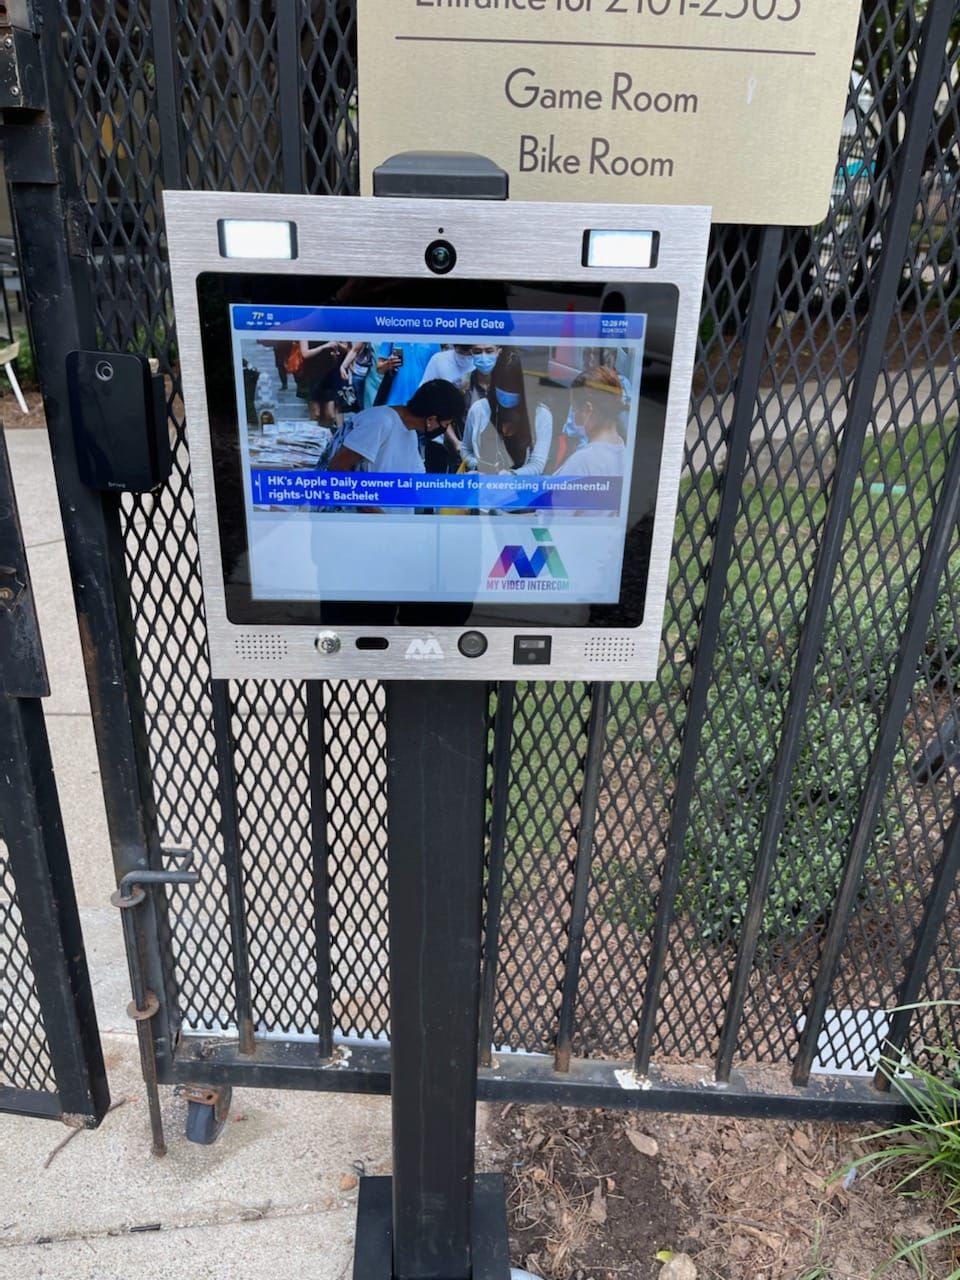 mvi keycom mounted on metal stand by gated entrance